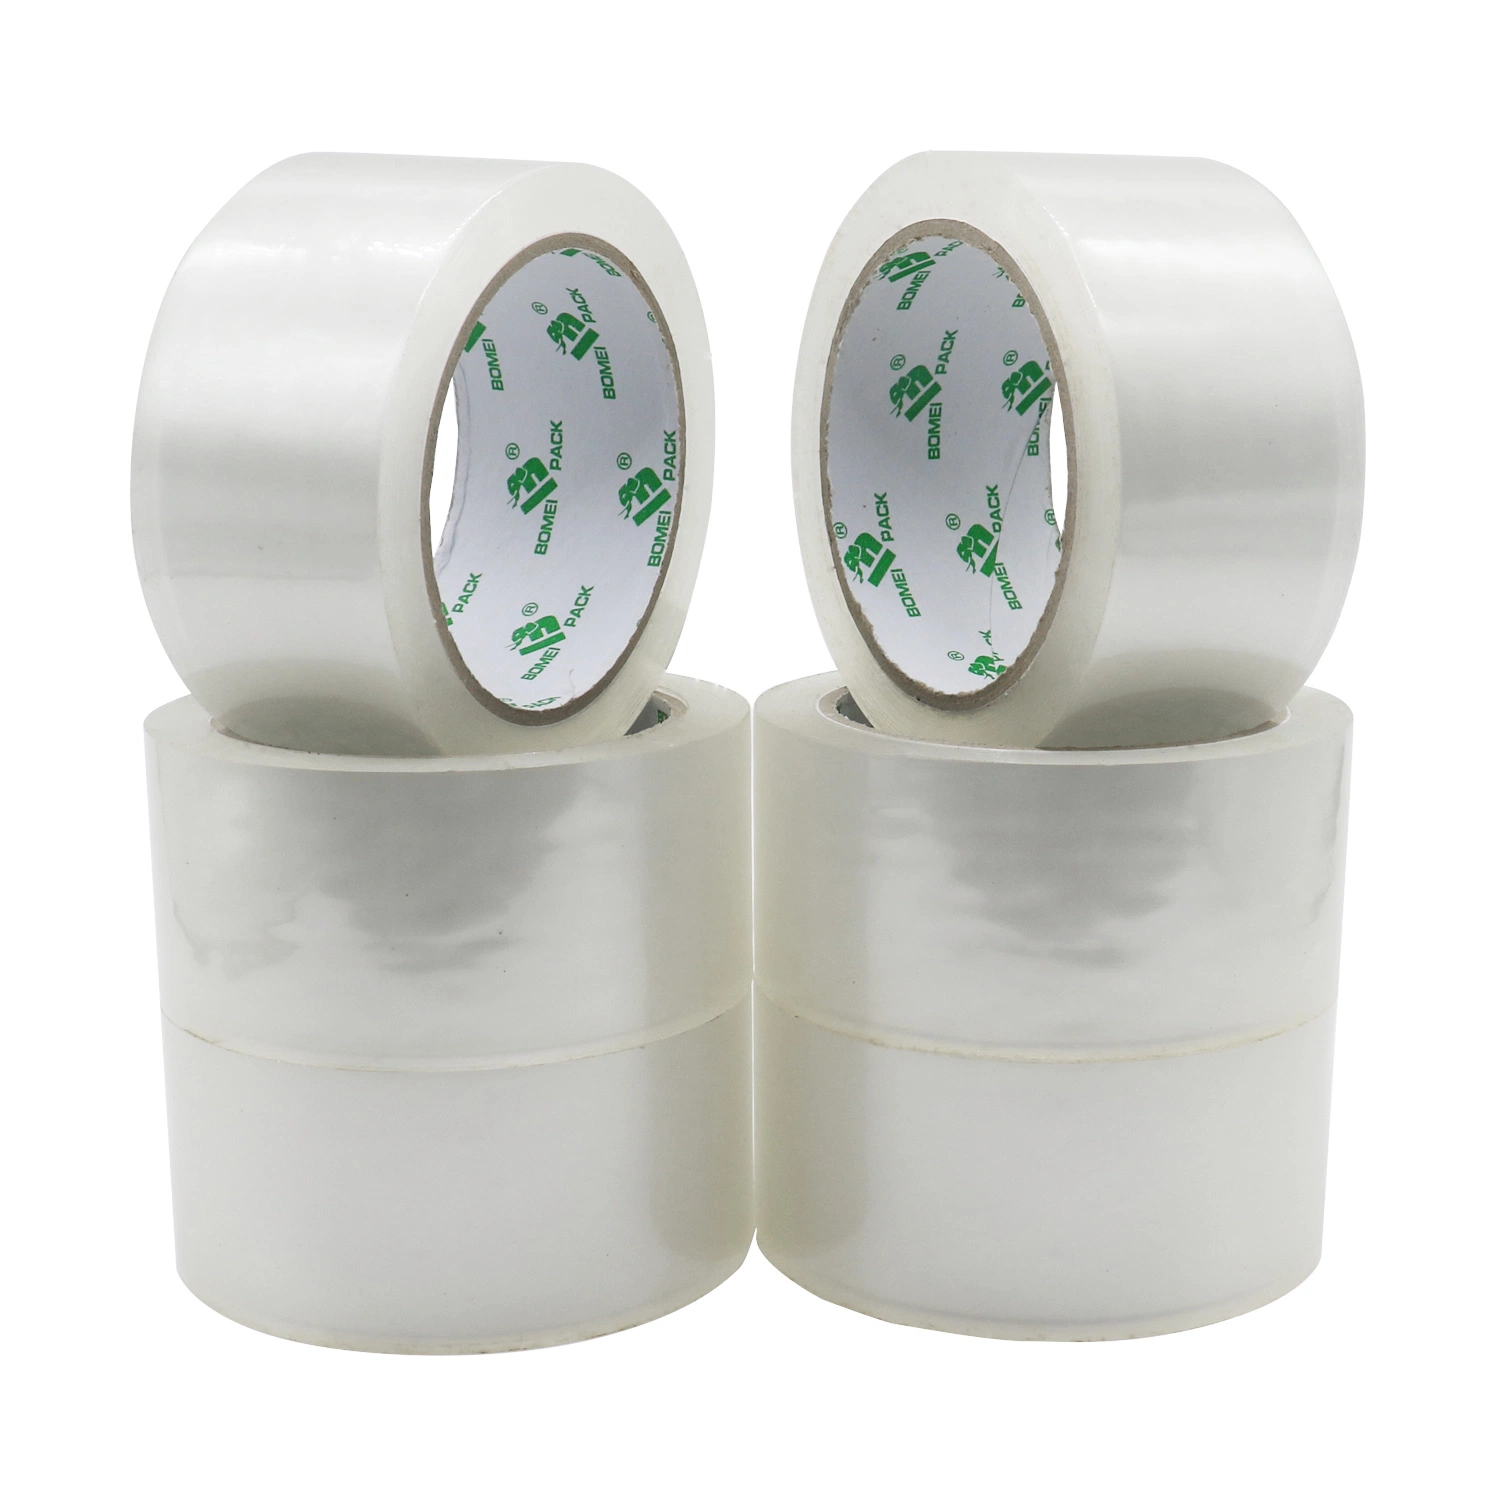 BOPP Film Adhesive Packing Tape Clear No Bubble No Noise Tape